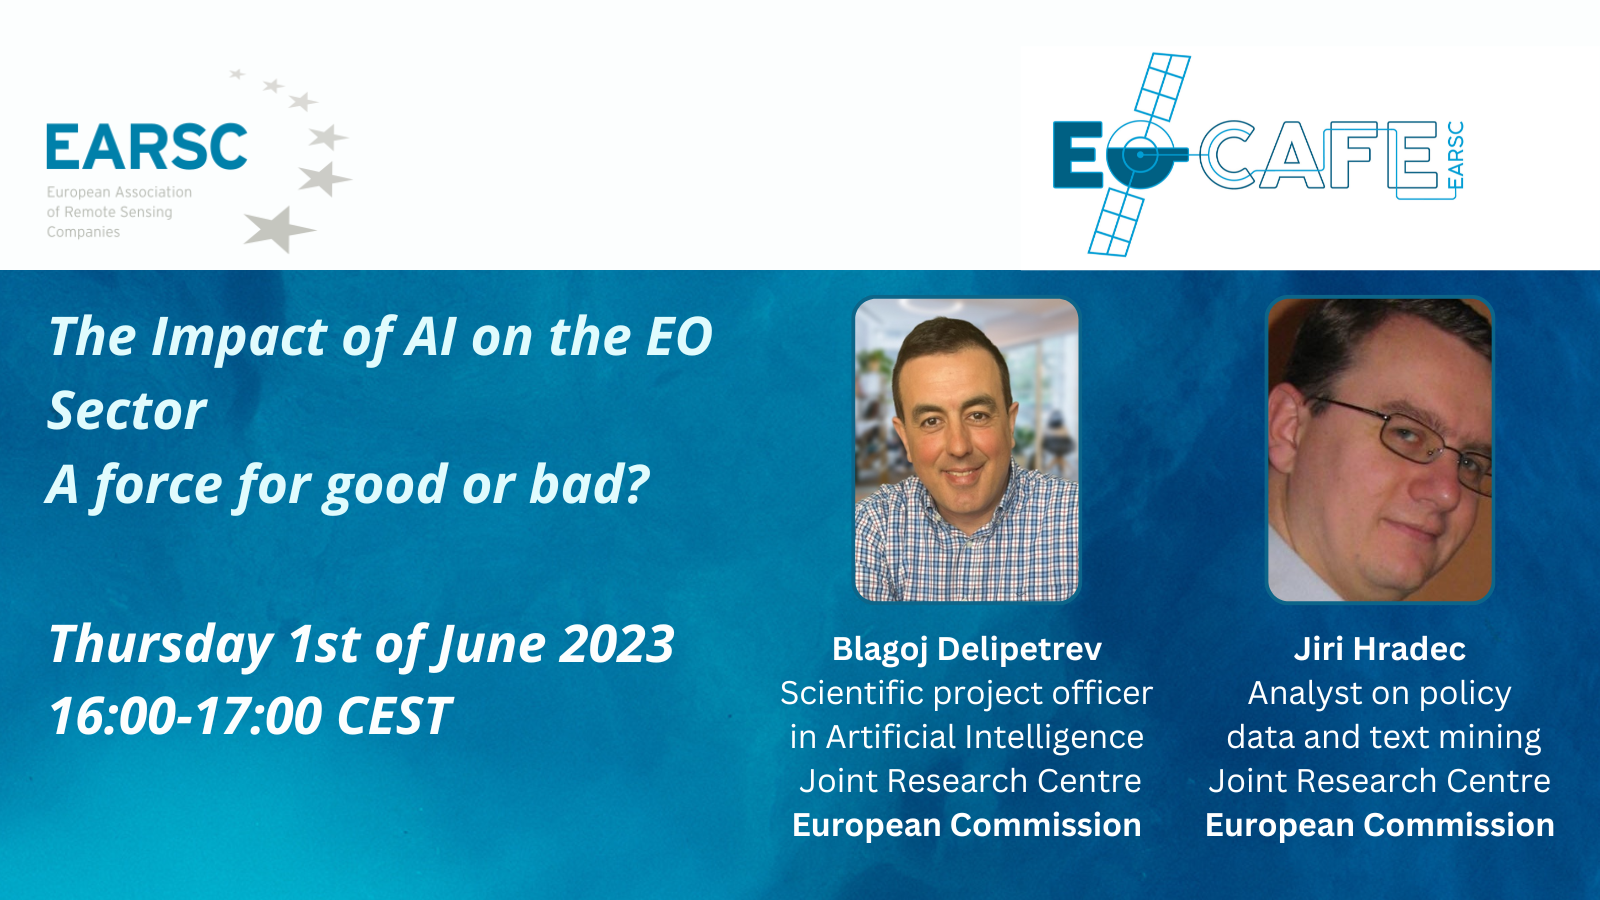 EOcafe: The Impact of AI on the EO Sector. A force for good or bad?